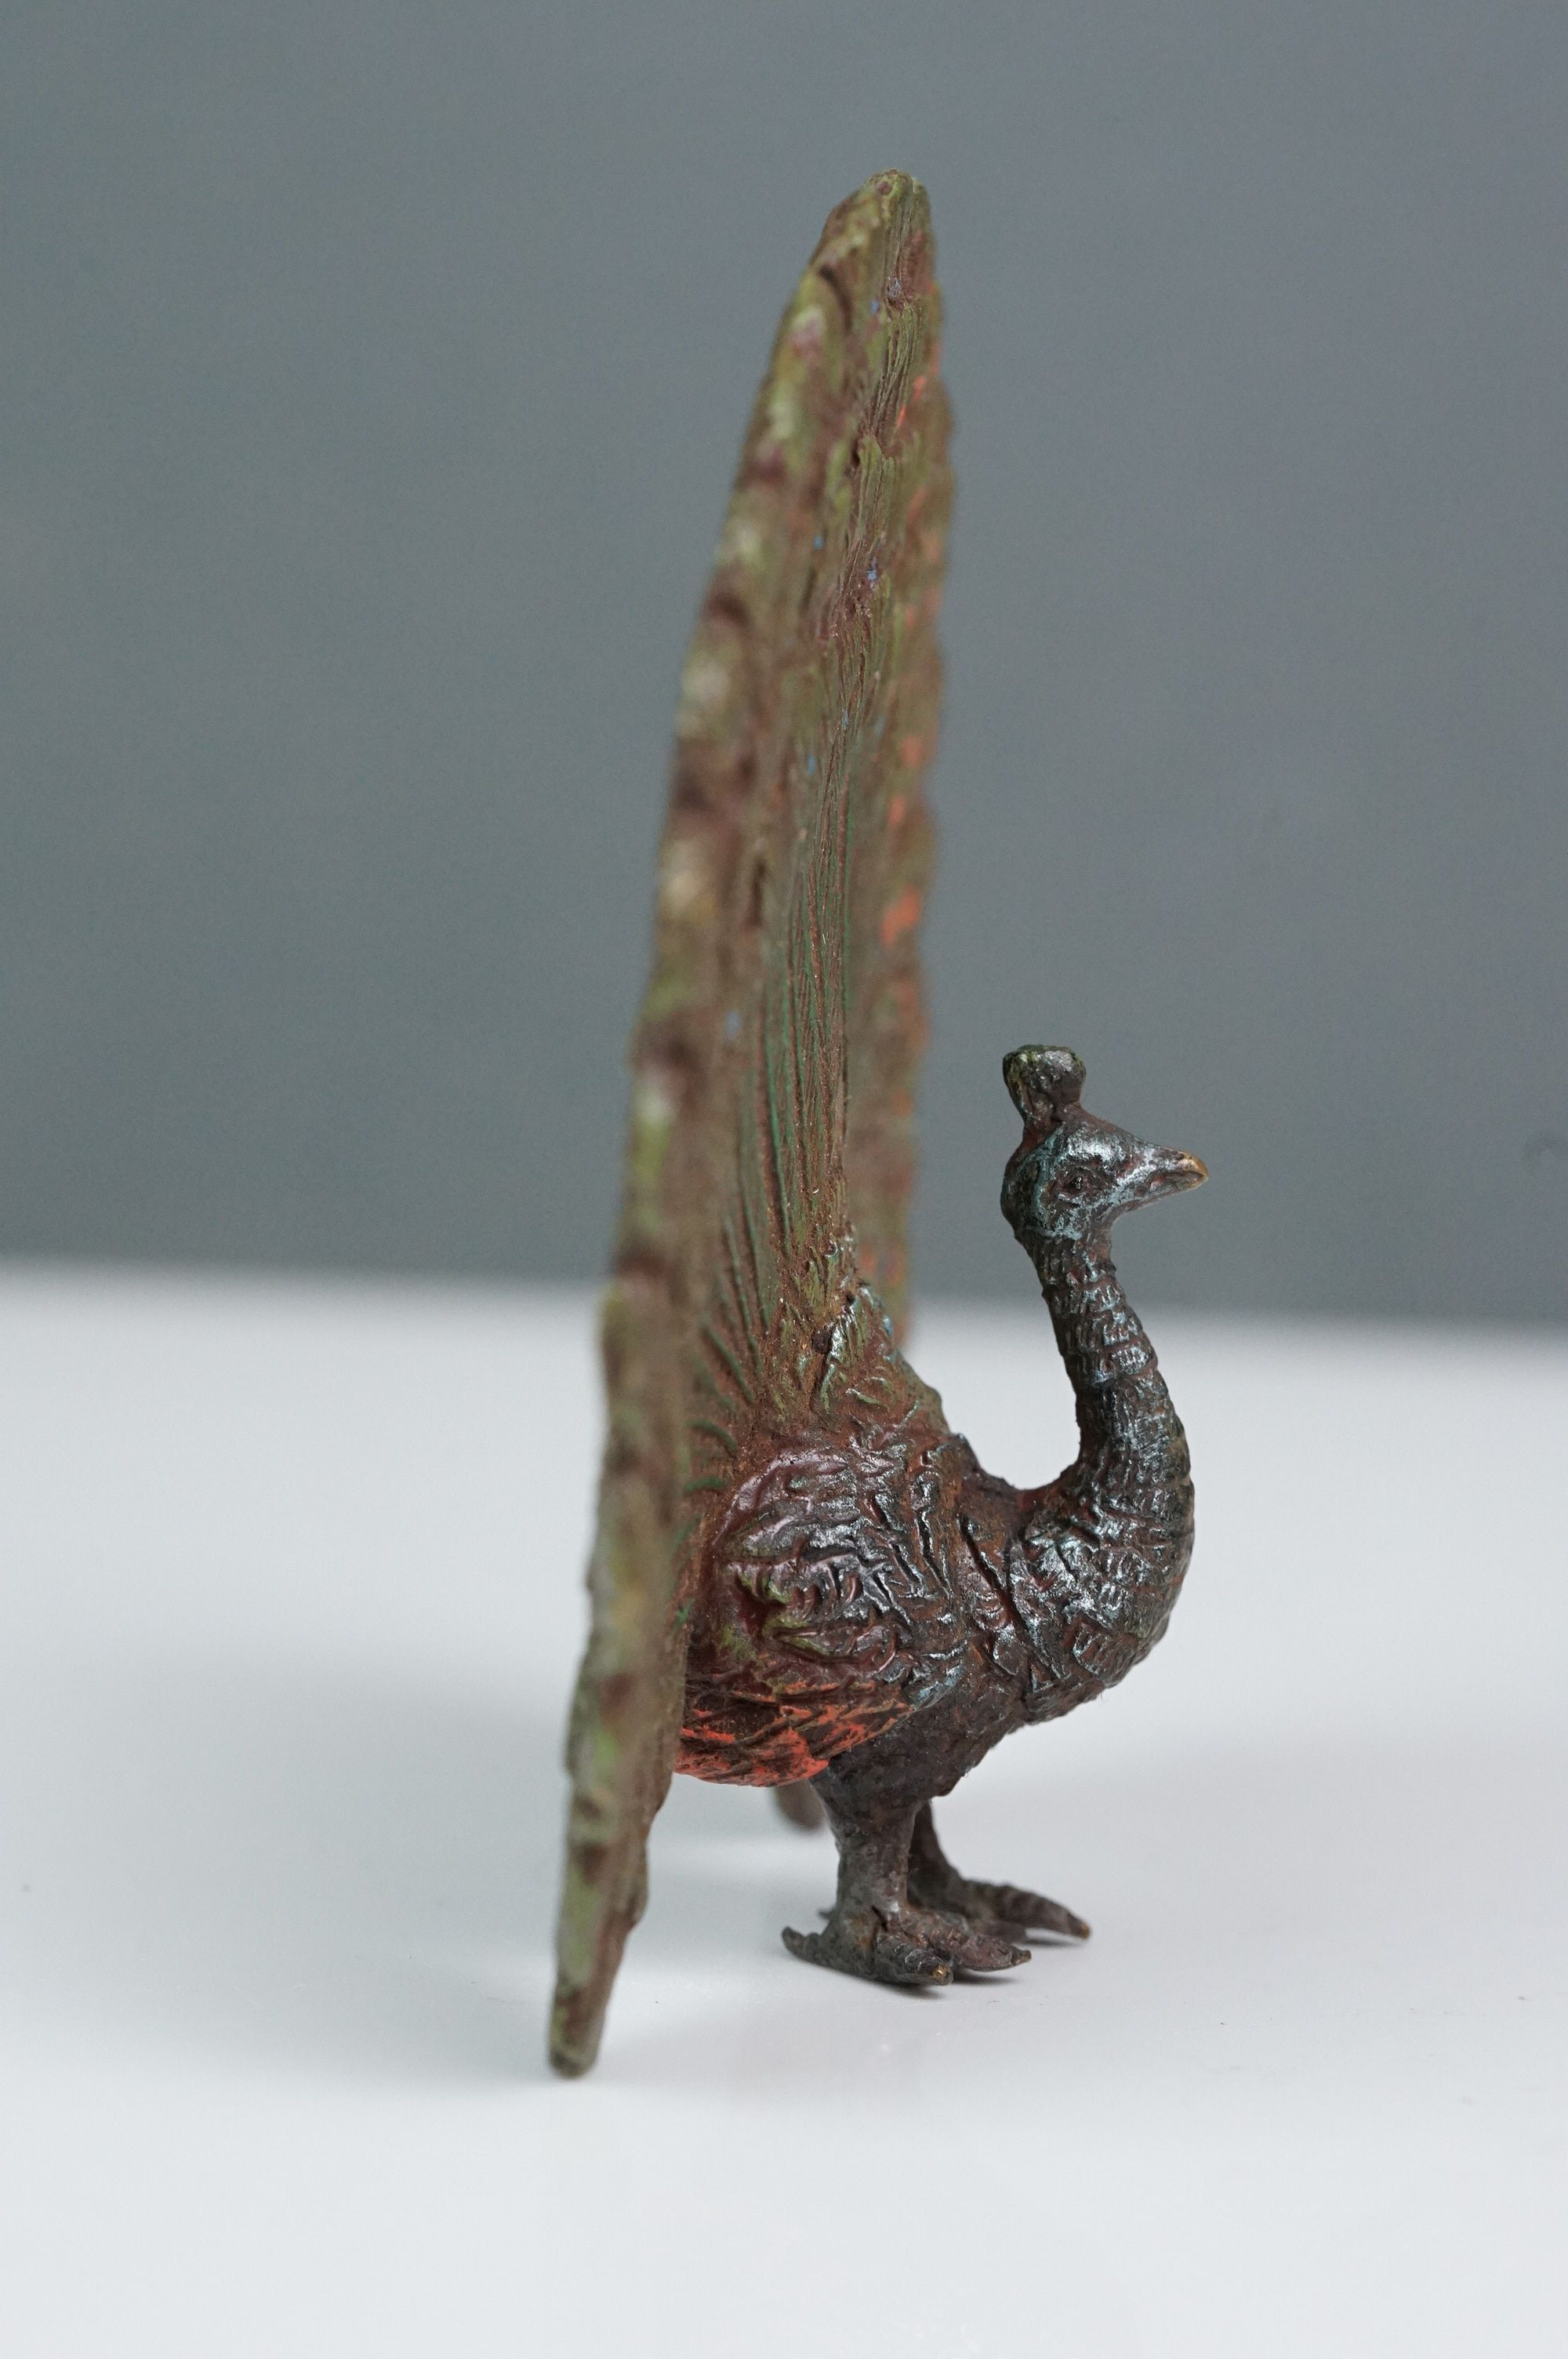 Cold painted bronze figure of a peacock with extended feathers - Image 2 of 6